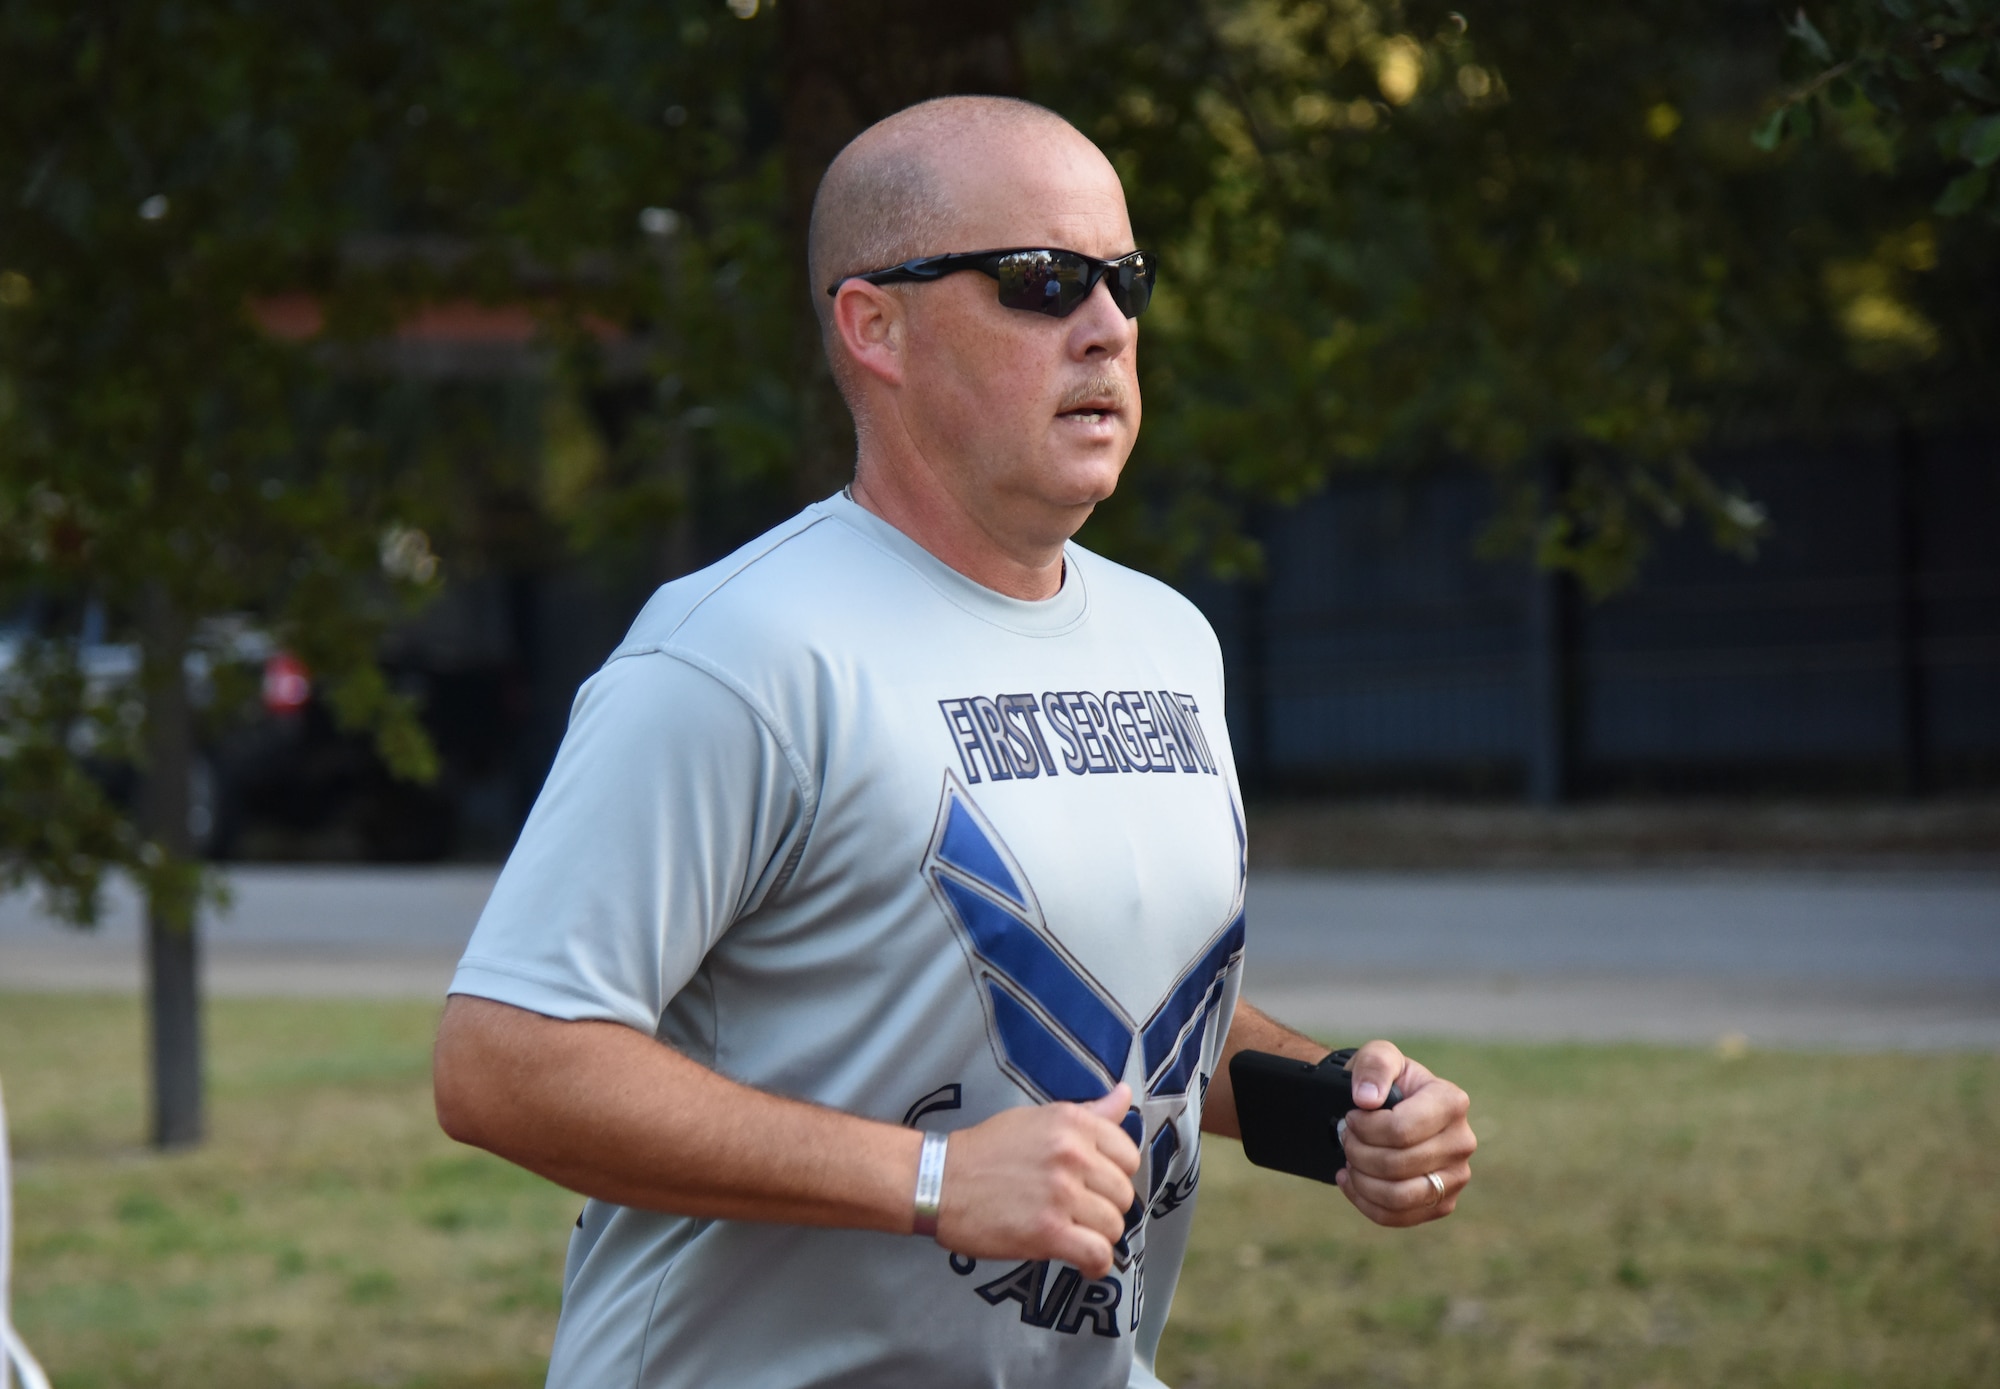 Master Sgt. Joseph Clifford, 336th Training Squadron first sergeant, participates in Keesler’s POW/MIA 24-hour memorial run and vigil at the Crotwell Track Sept. 14, 2017, on Keesler Air Force Base, Mississippi. The event was held to raise awareness and pay tribute to all prisoners of war and those military members still missing in action. (U.S. Air Force photo by Kemberly Groue)